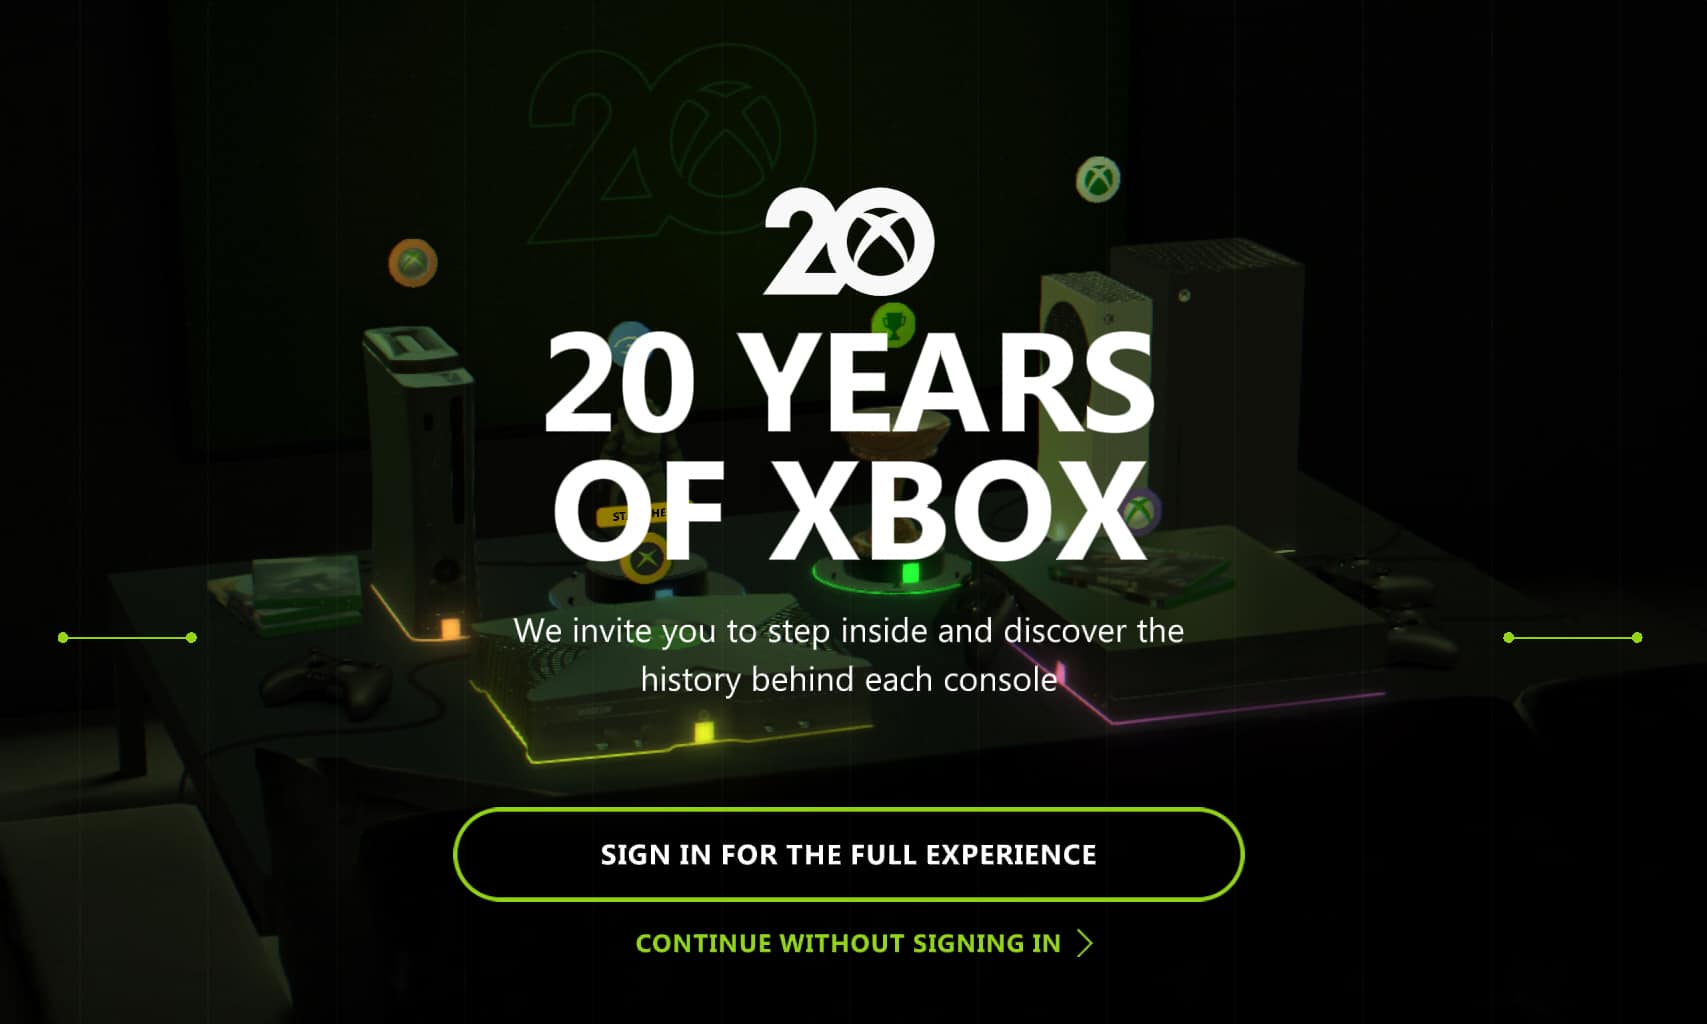 Celebrating 20 years of Xbox with milestones (by True Achievements)